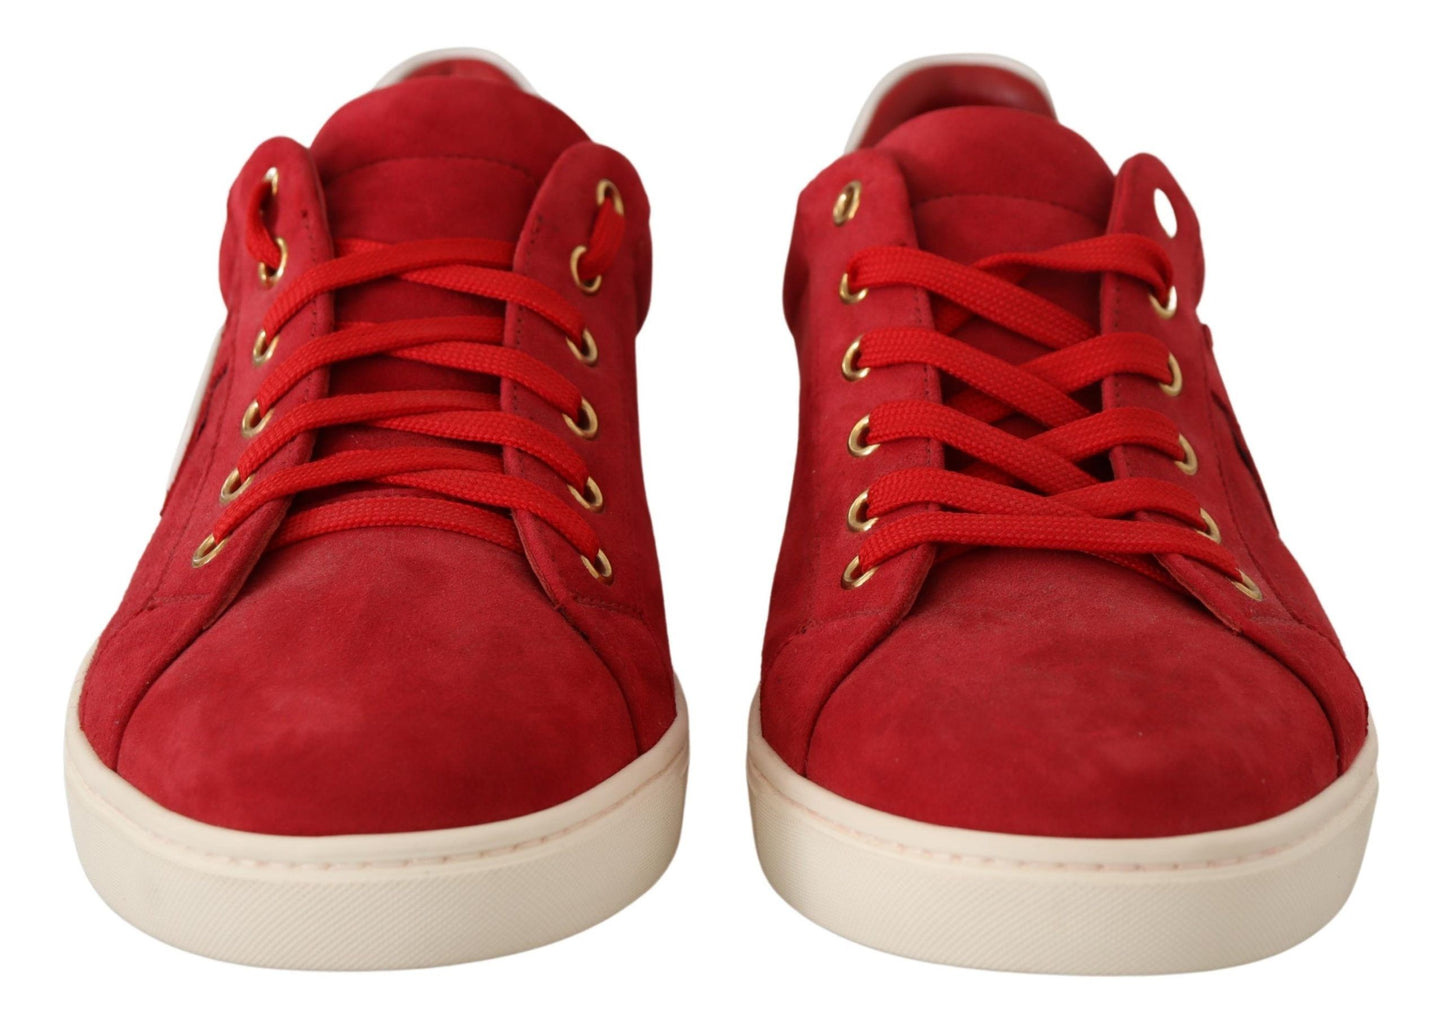 Elegant Red Leather & Suede Sneakers